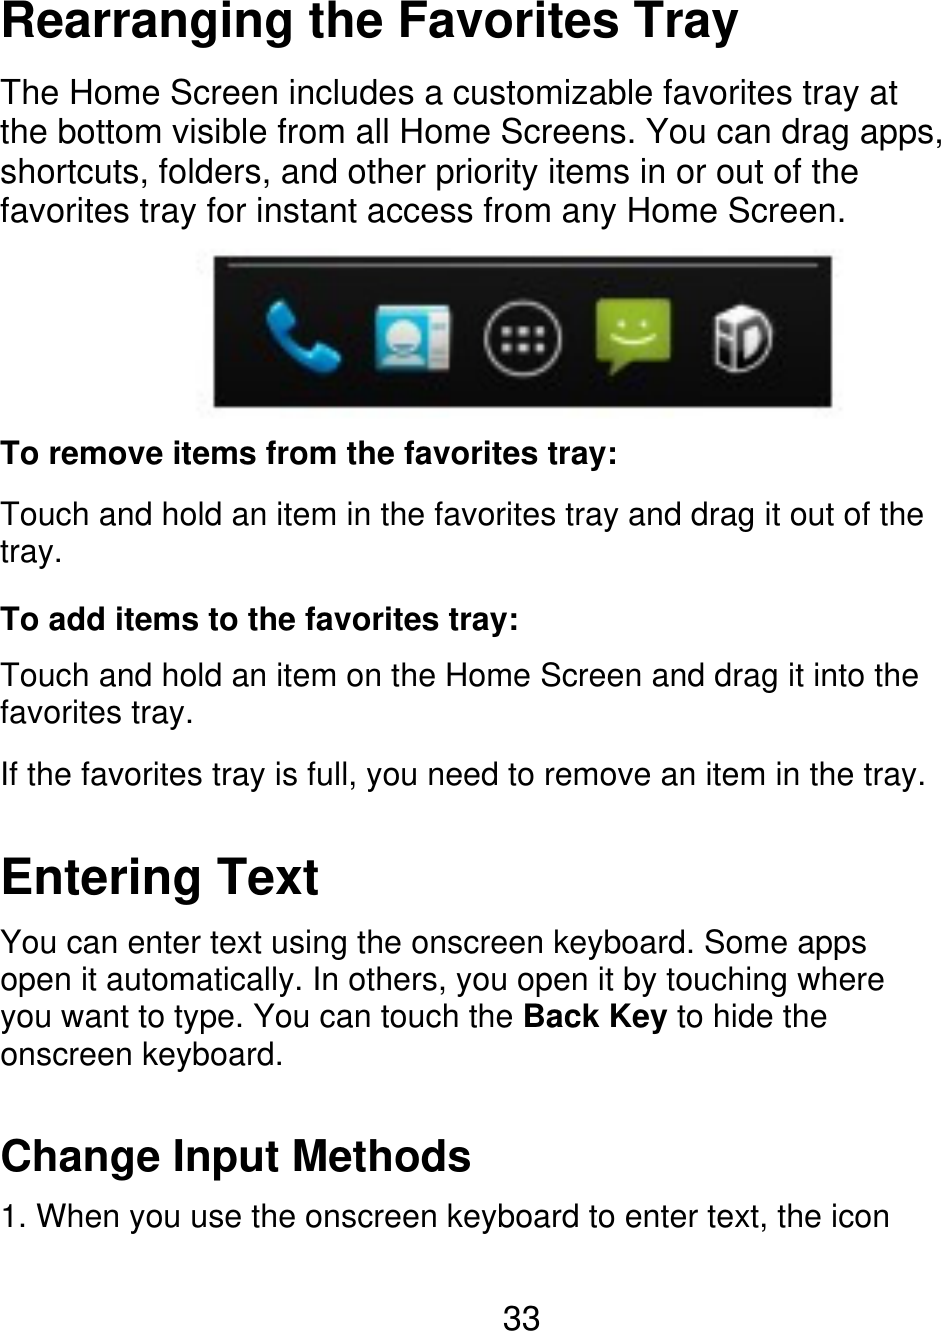 Rearranging the Favorites Tray The Home Screen includes a customizable favorites tray at the bottom visible from all Home Screens. You can drag apps, shortcuts, folders, and other priority items in or out of the favorites tray for instant access from any Home Screen. To remove items from the favorites tray: Touch and hold an item in the favorites tray and drag it out of the tray. To add items to the favorites tray: Touch and hold an item on the Home Screen and drag it into the favorites tray. If the favorites tray is full, you need to remove an item in the tray. Entering Text You can enter text using the onscreen keyboard. Some apps open it automatically. In others, you open it by touching where you want to type. You can touch the Back Key to hide the onscreen keyboard. Change Input Methods 1. When you use the onscreen keyboard to enter text, the icon 33 